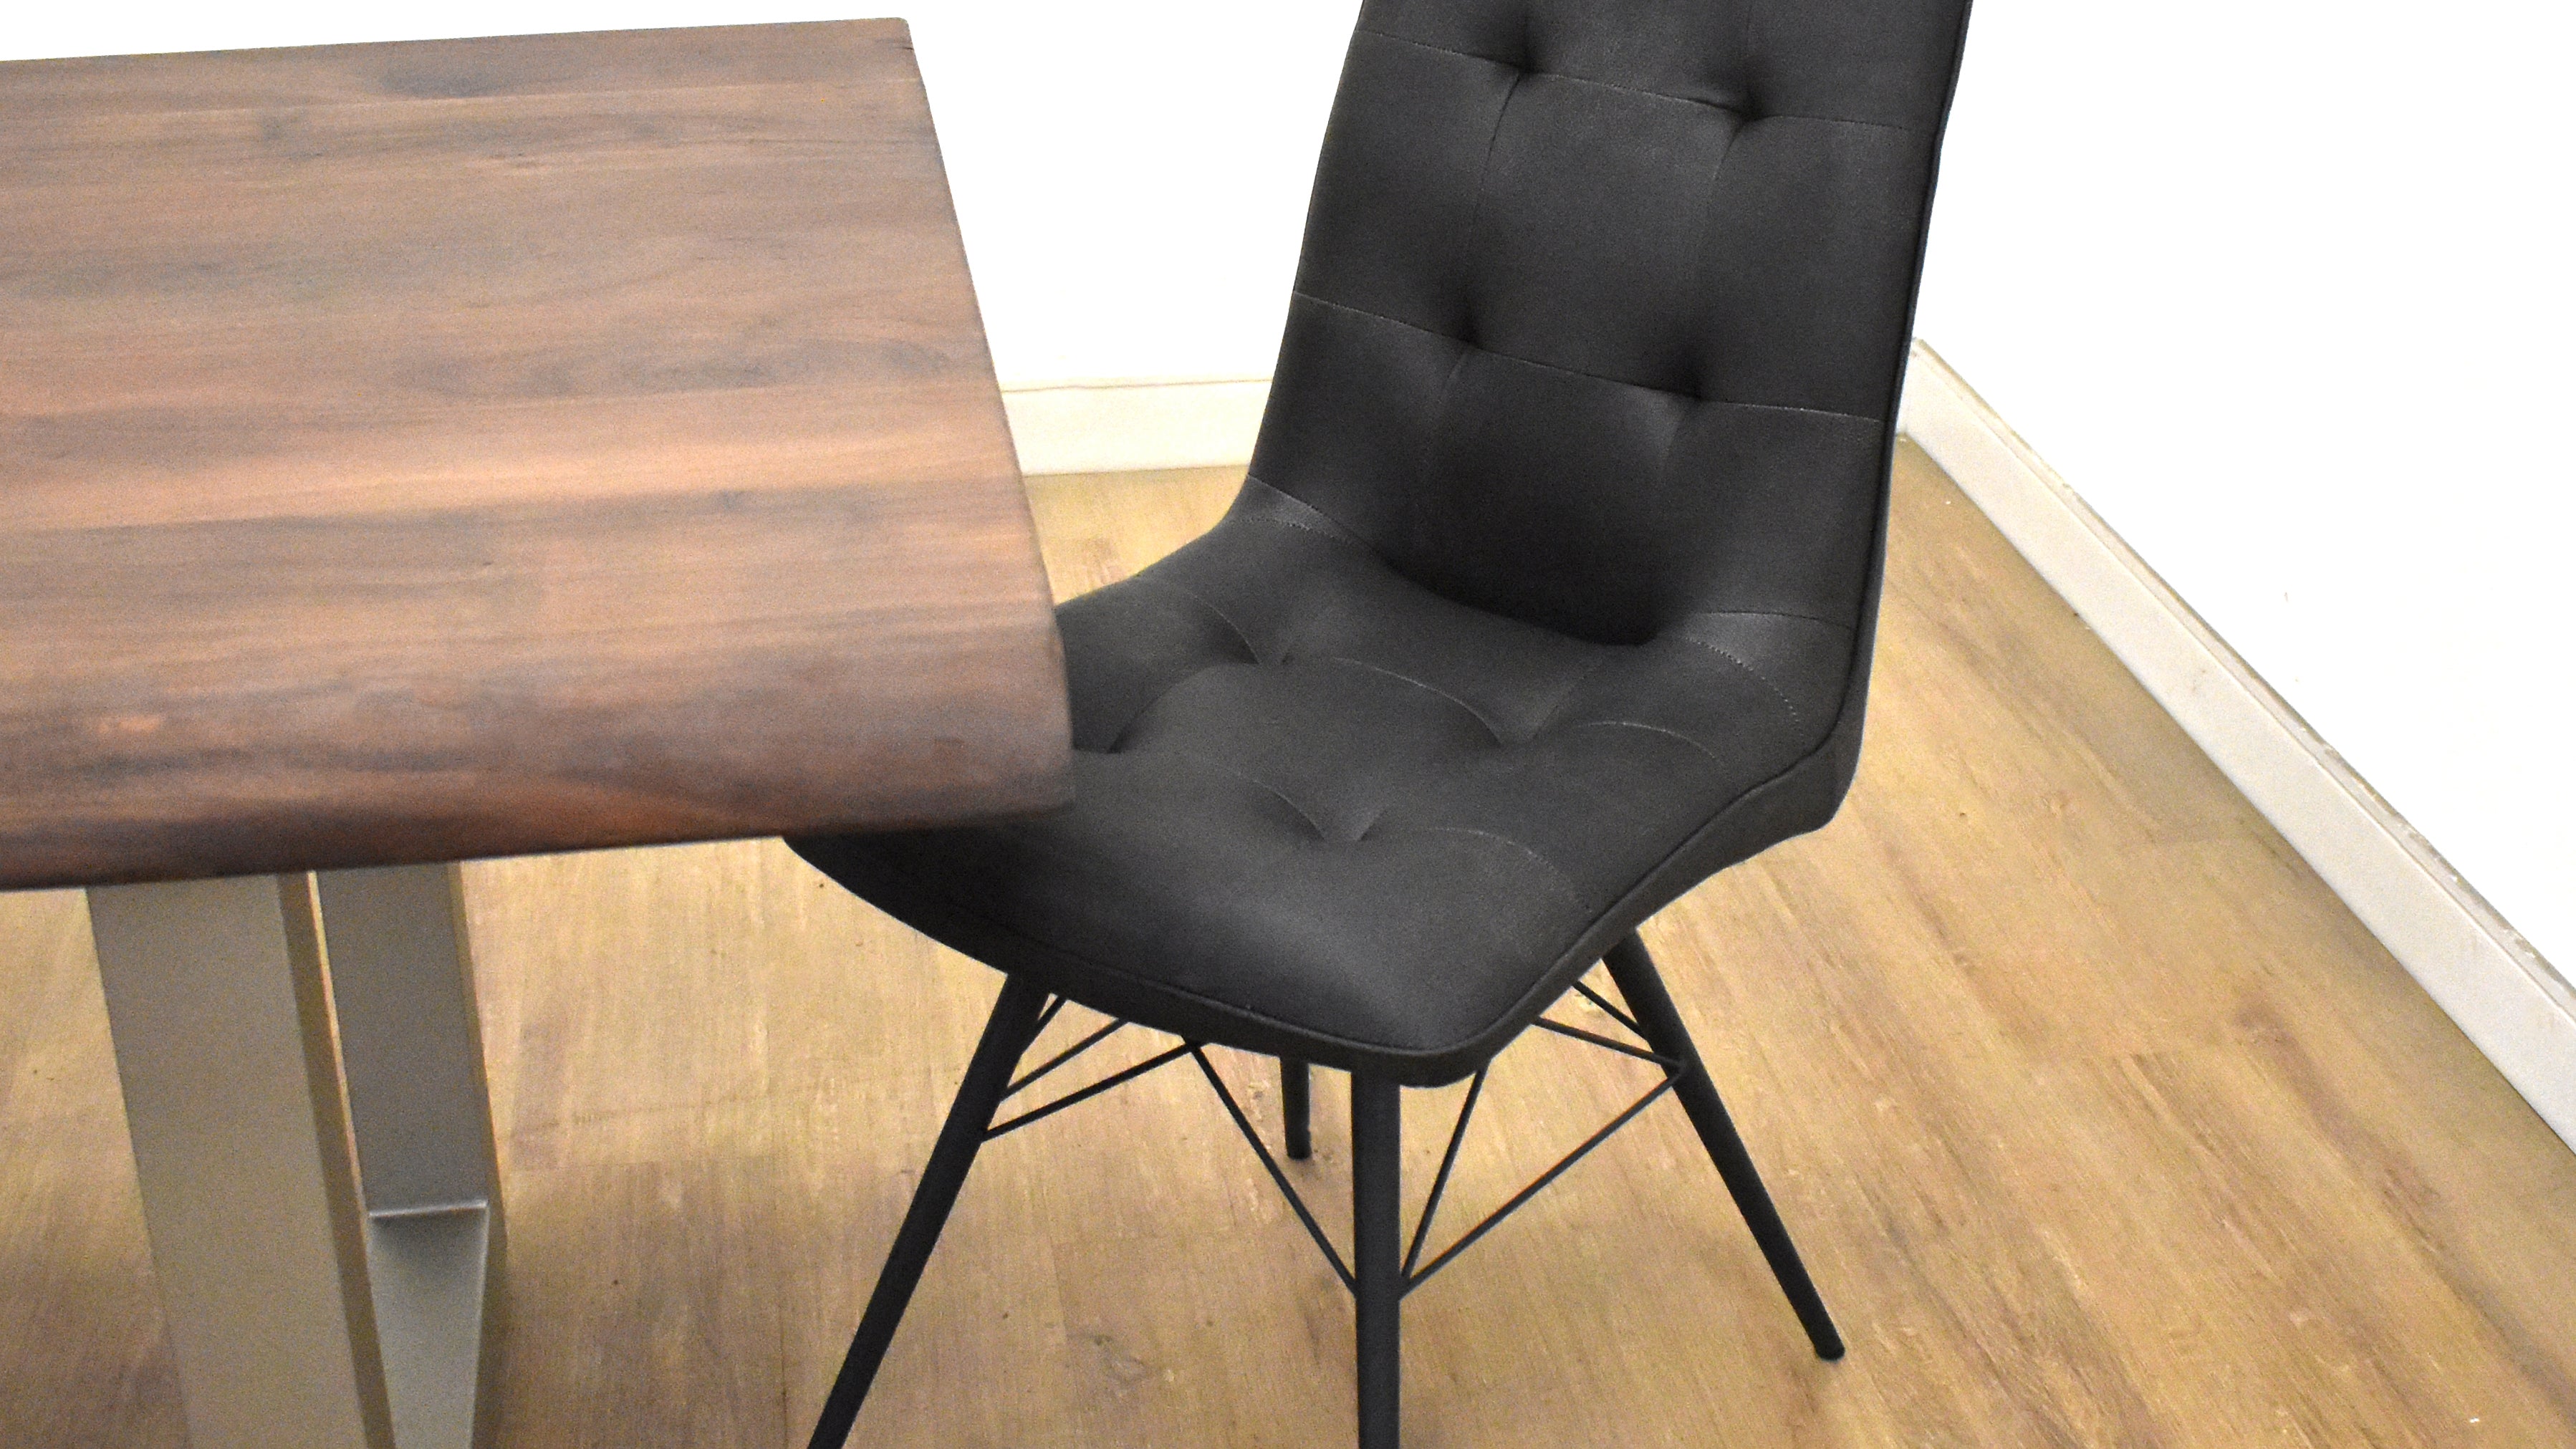 TORONTO DINING CHAIRS AND STOOLS-furniture stores regina-Hunters Furniture